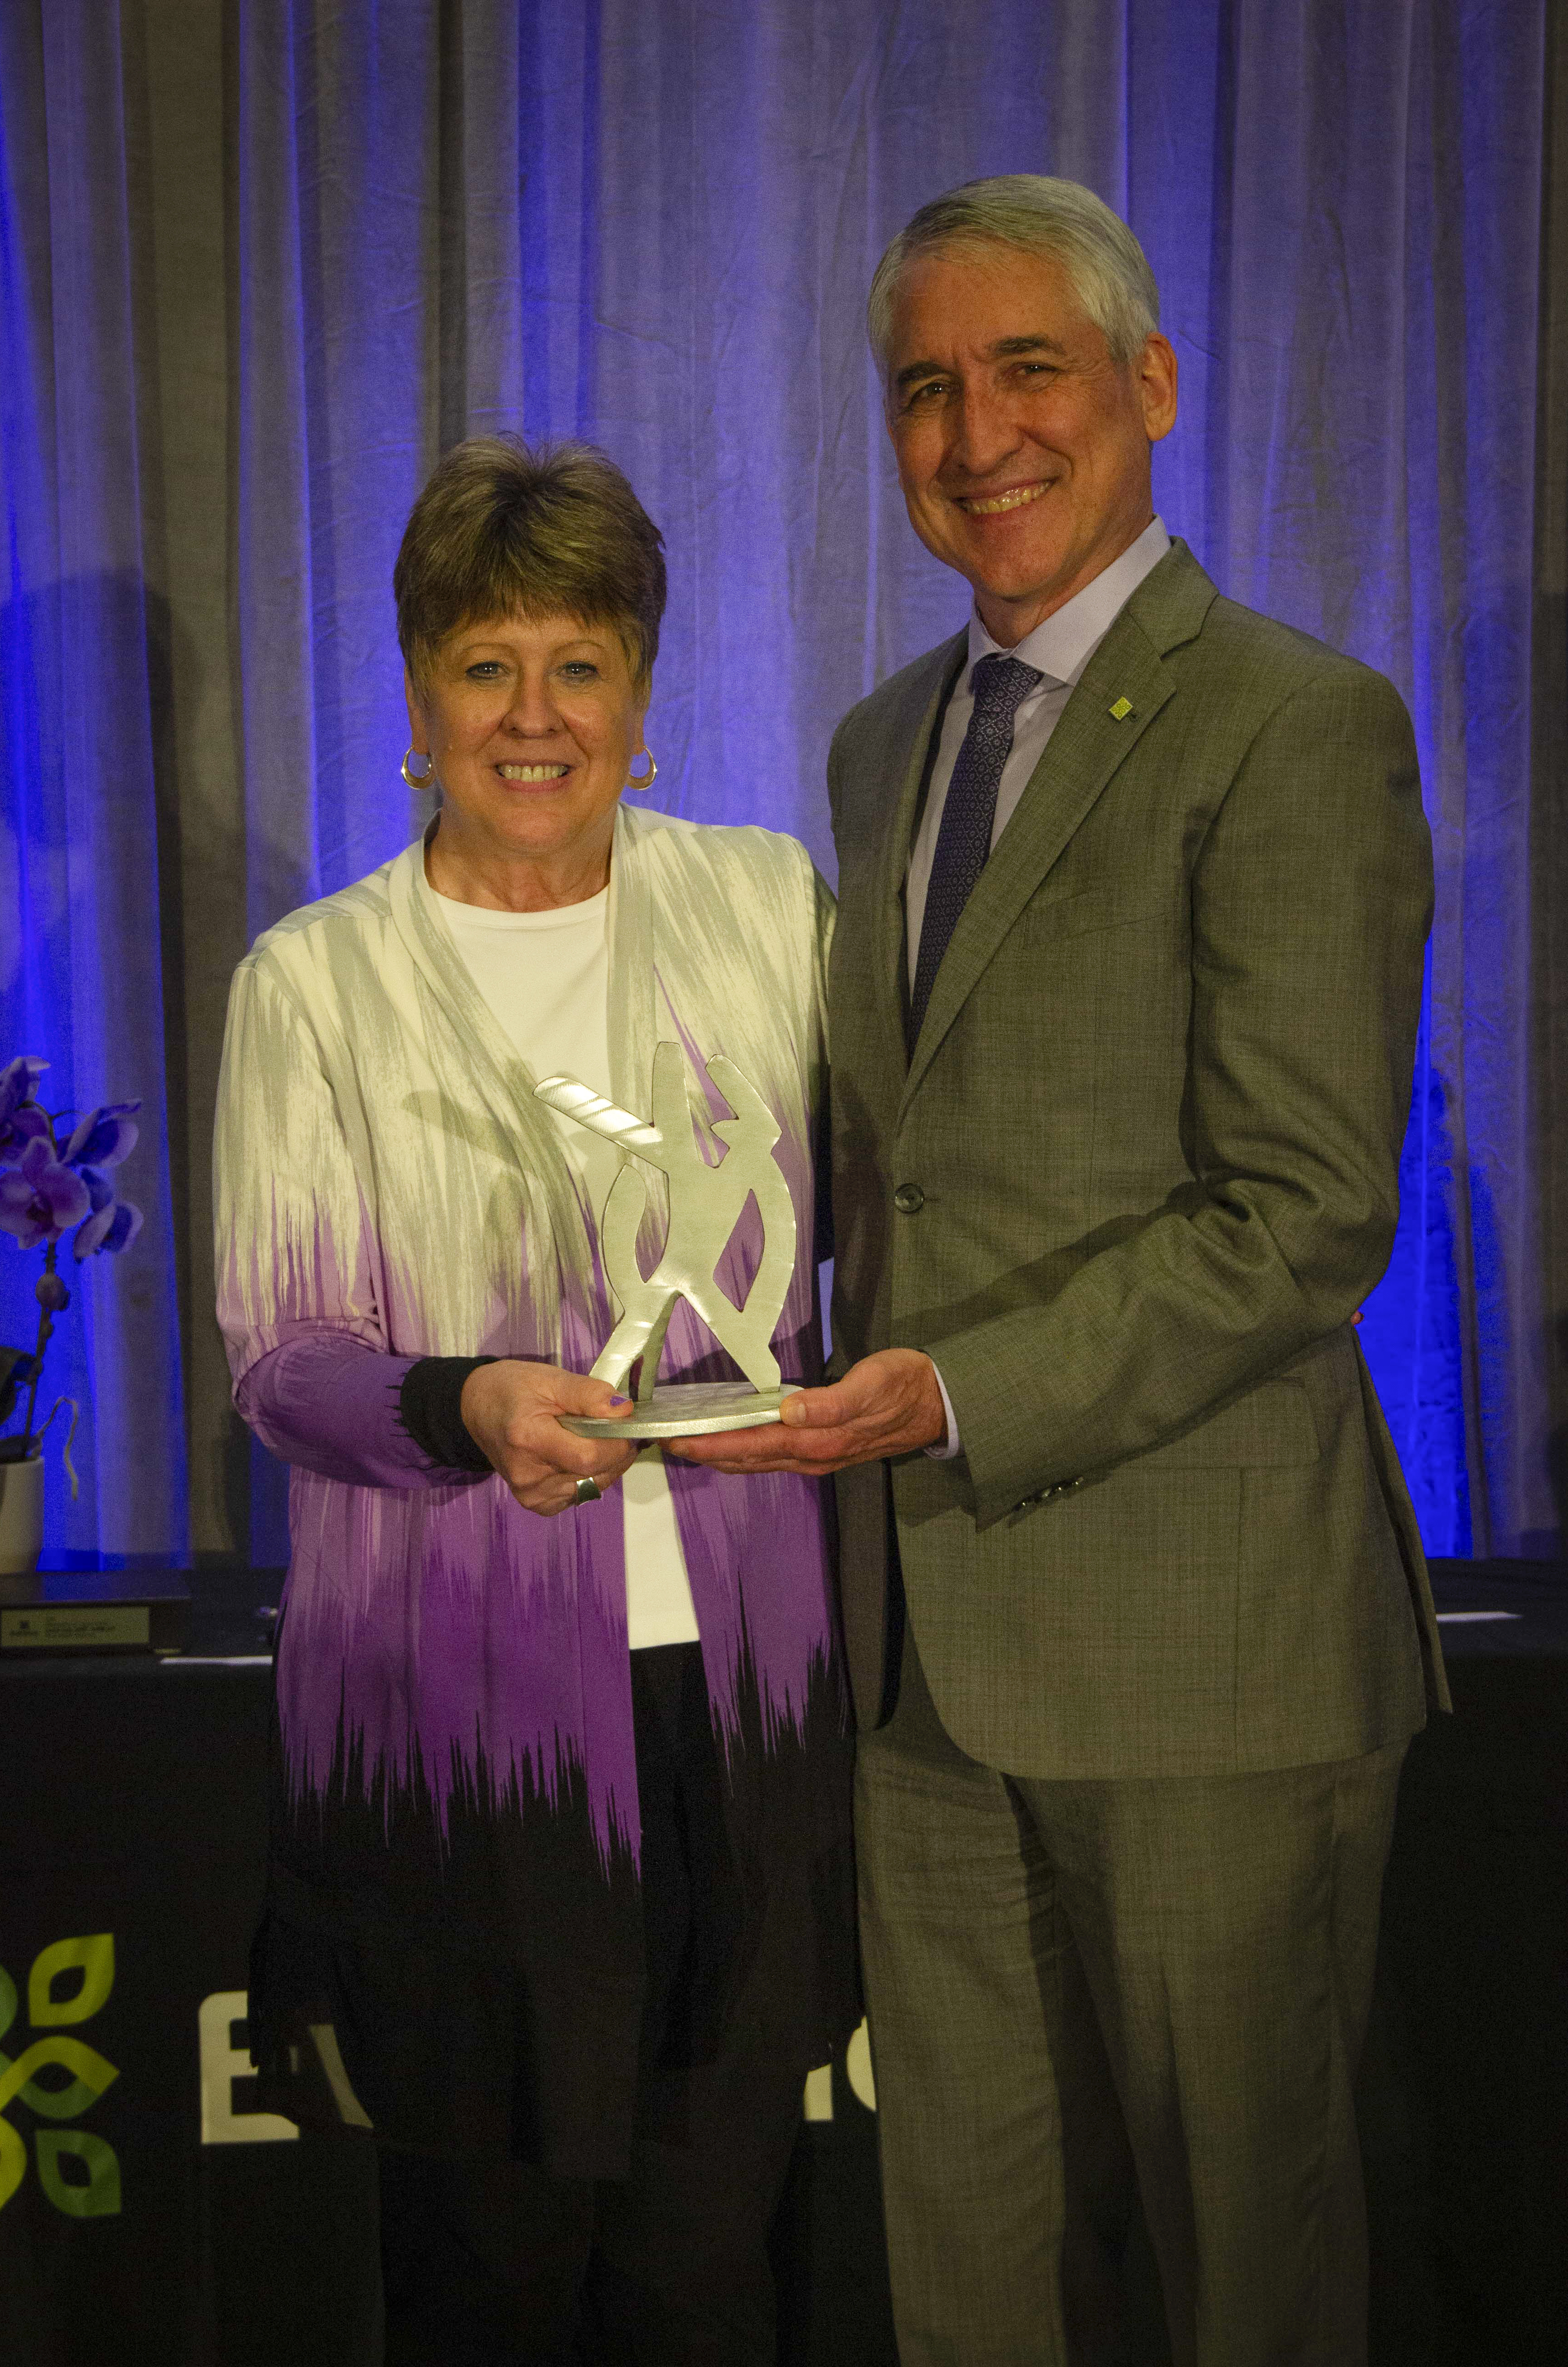 Ken Hochstetler, Everence President and CEO (right), presents Eunice Culp, Vice President of Human Resources with the Stewardship of Culture Award (April 2022).